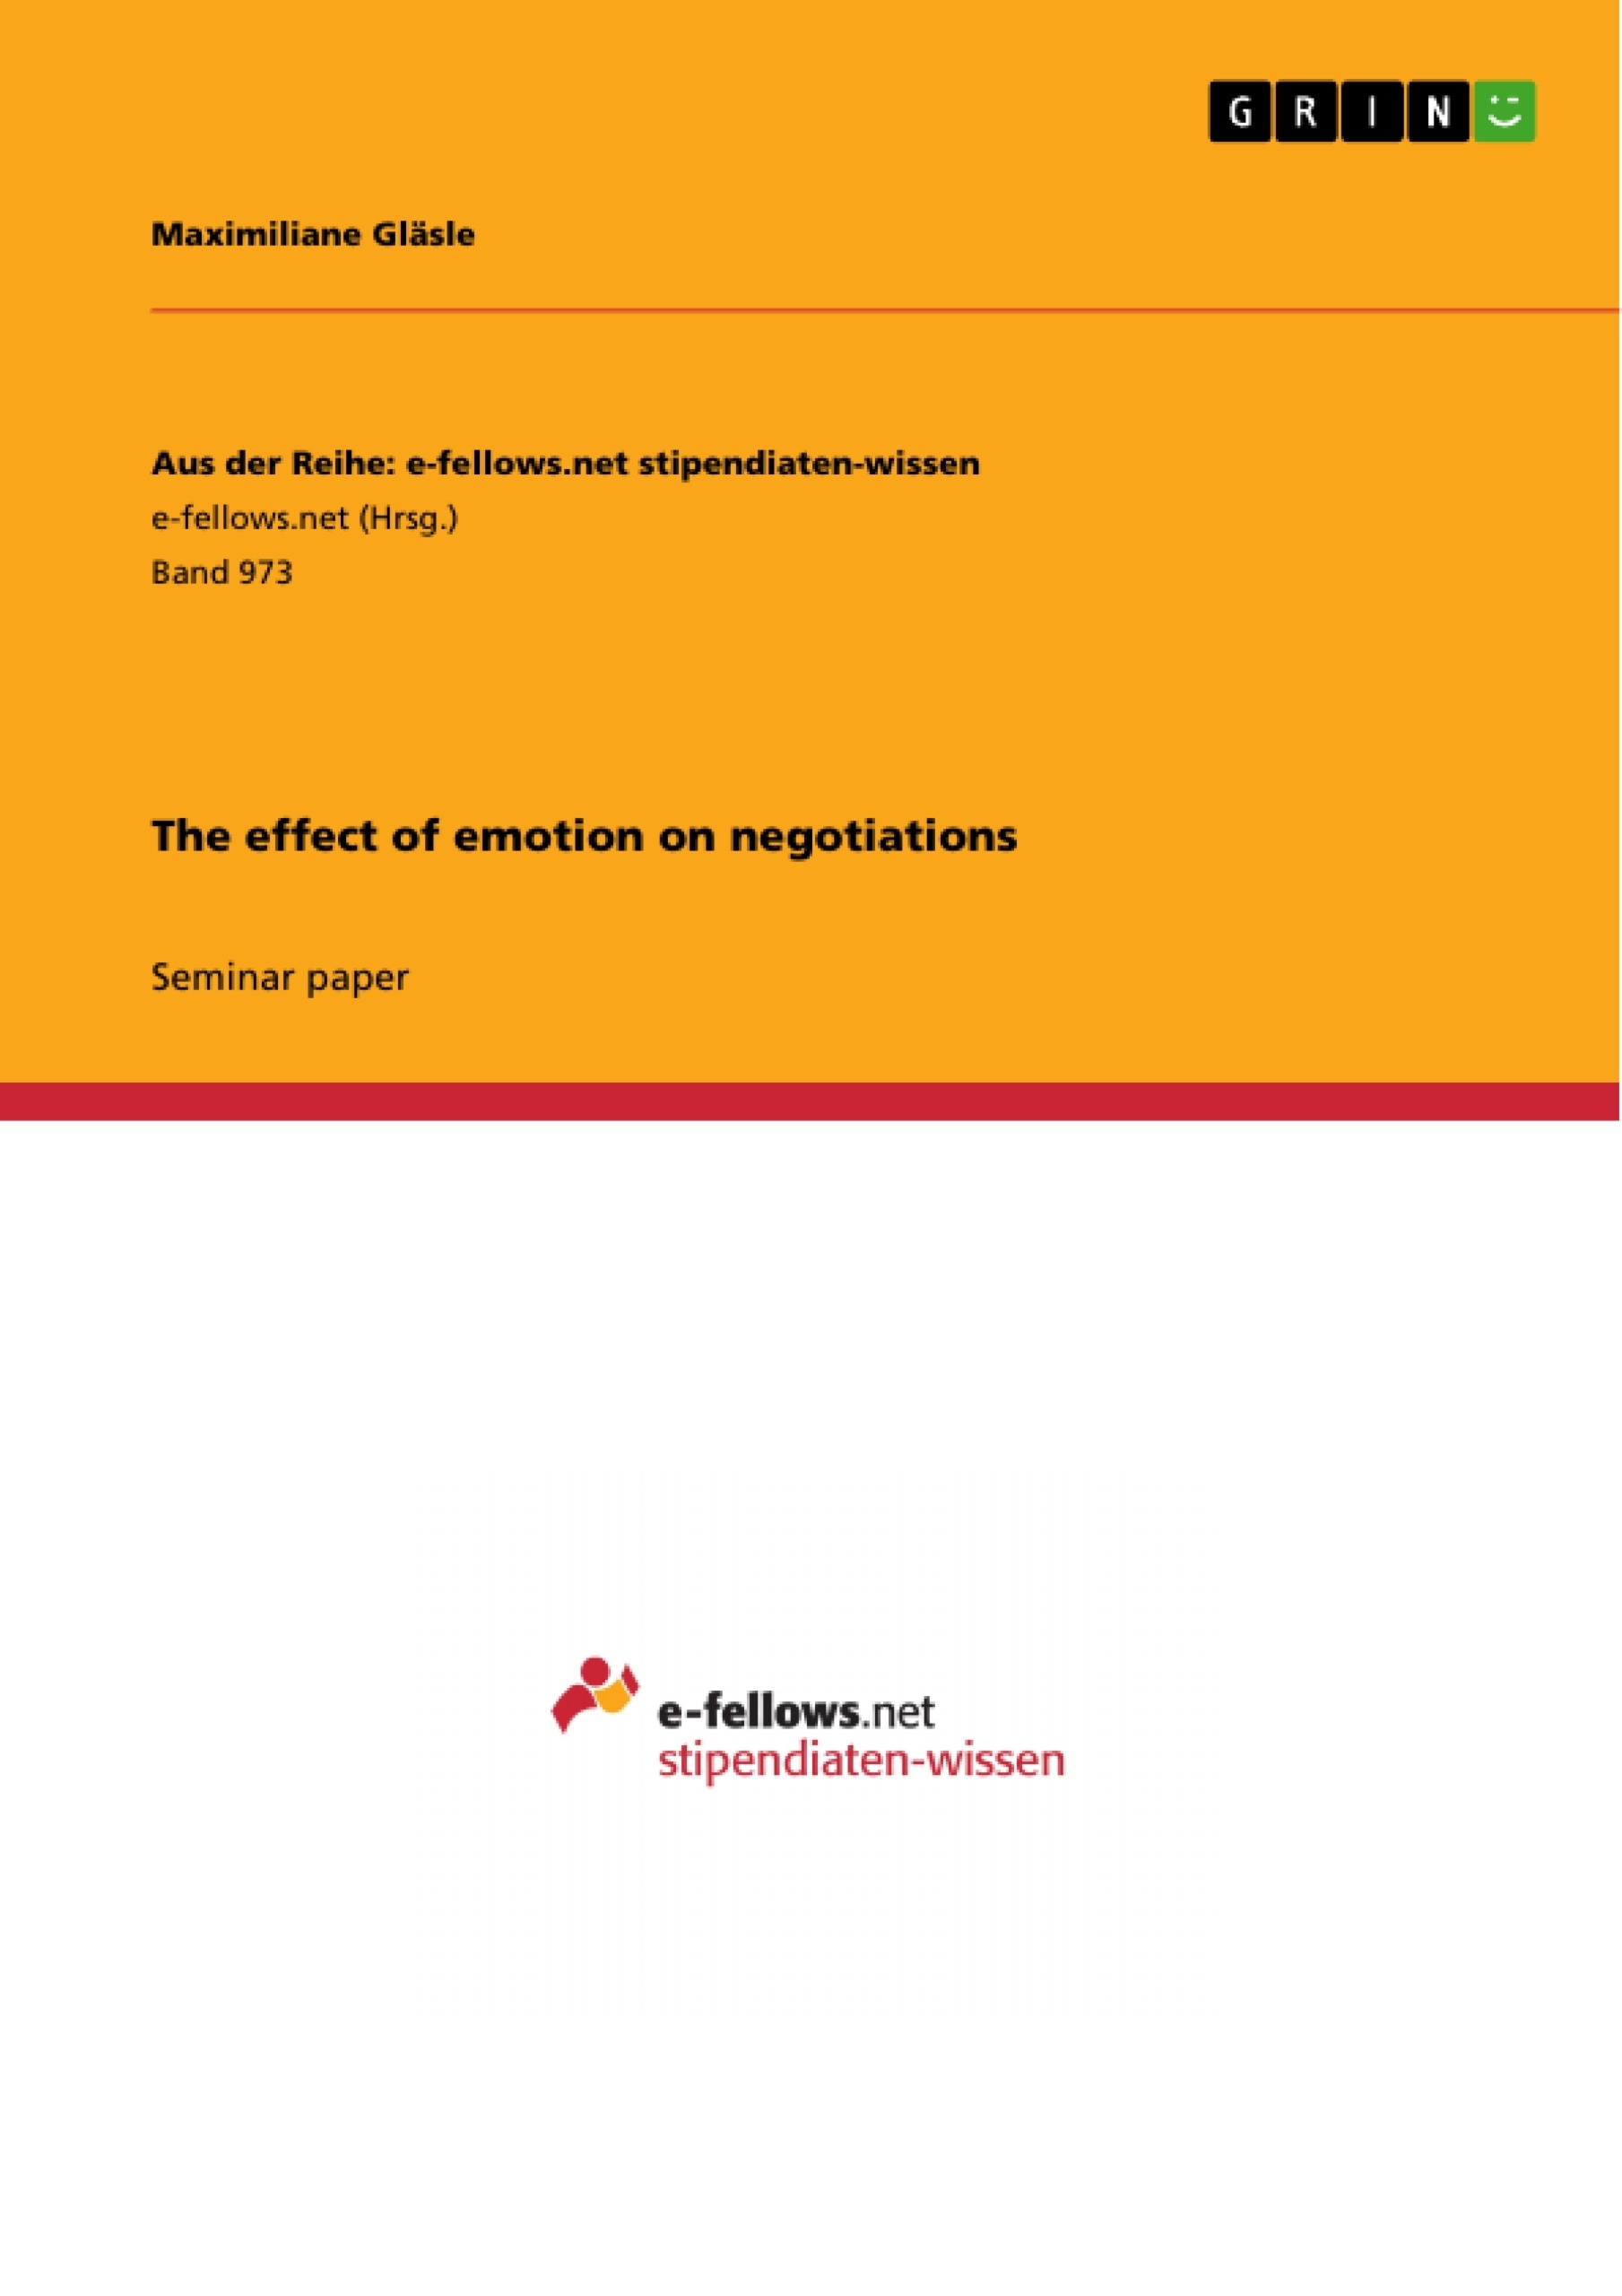 Title: The effect of emotion on negotiations